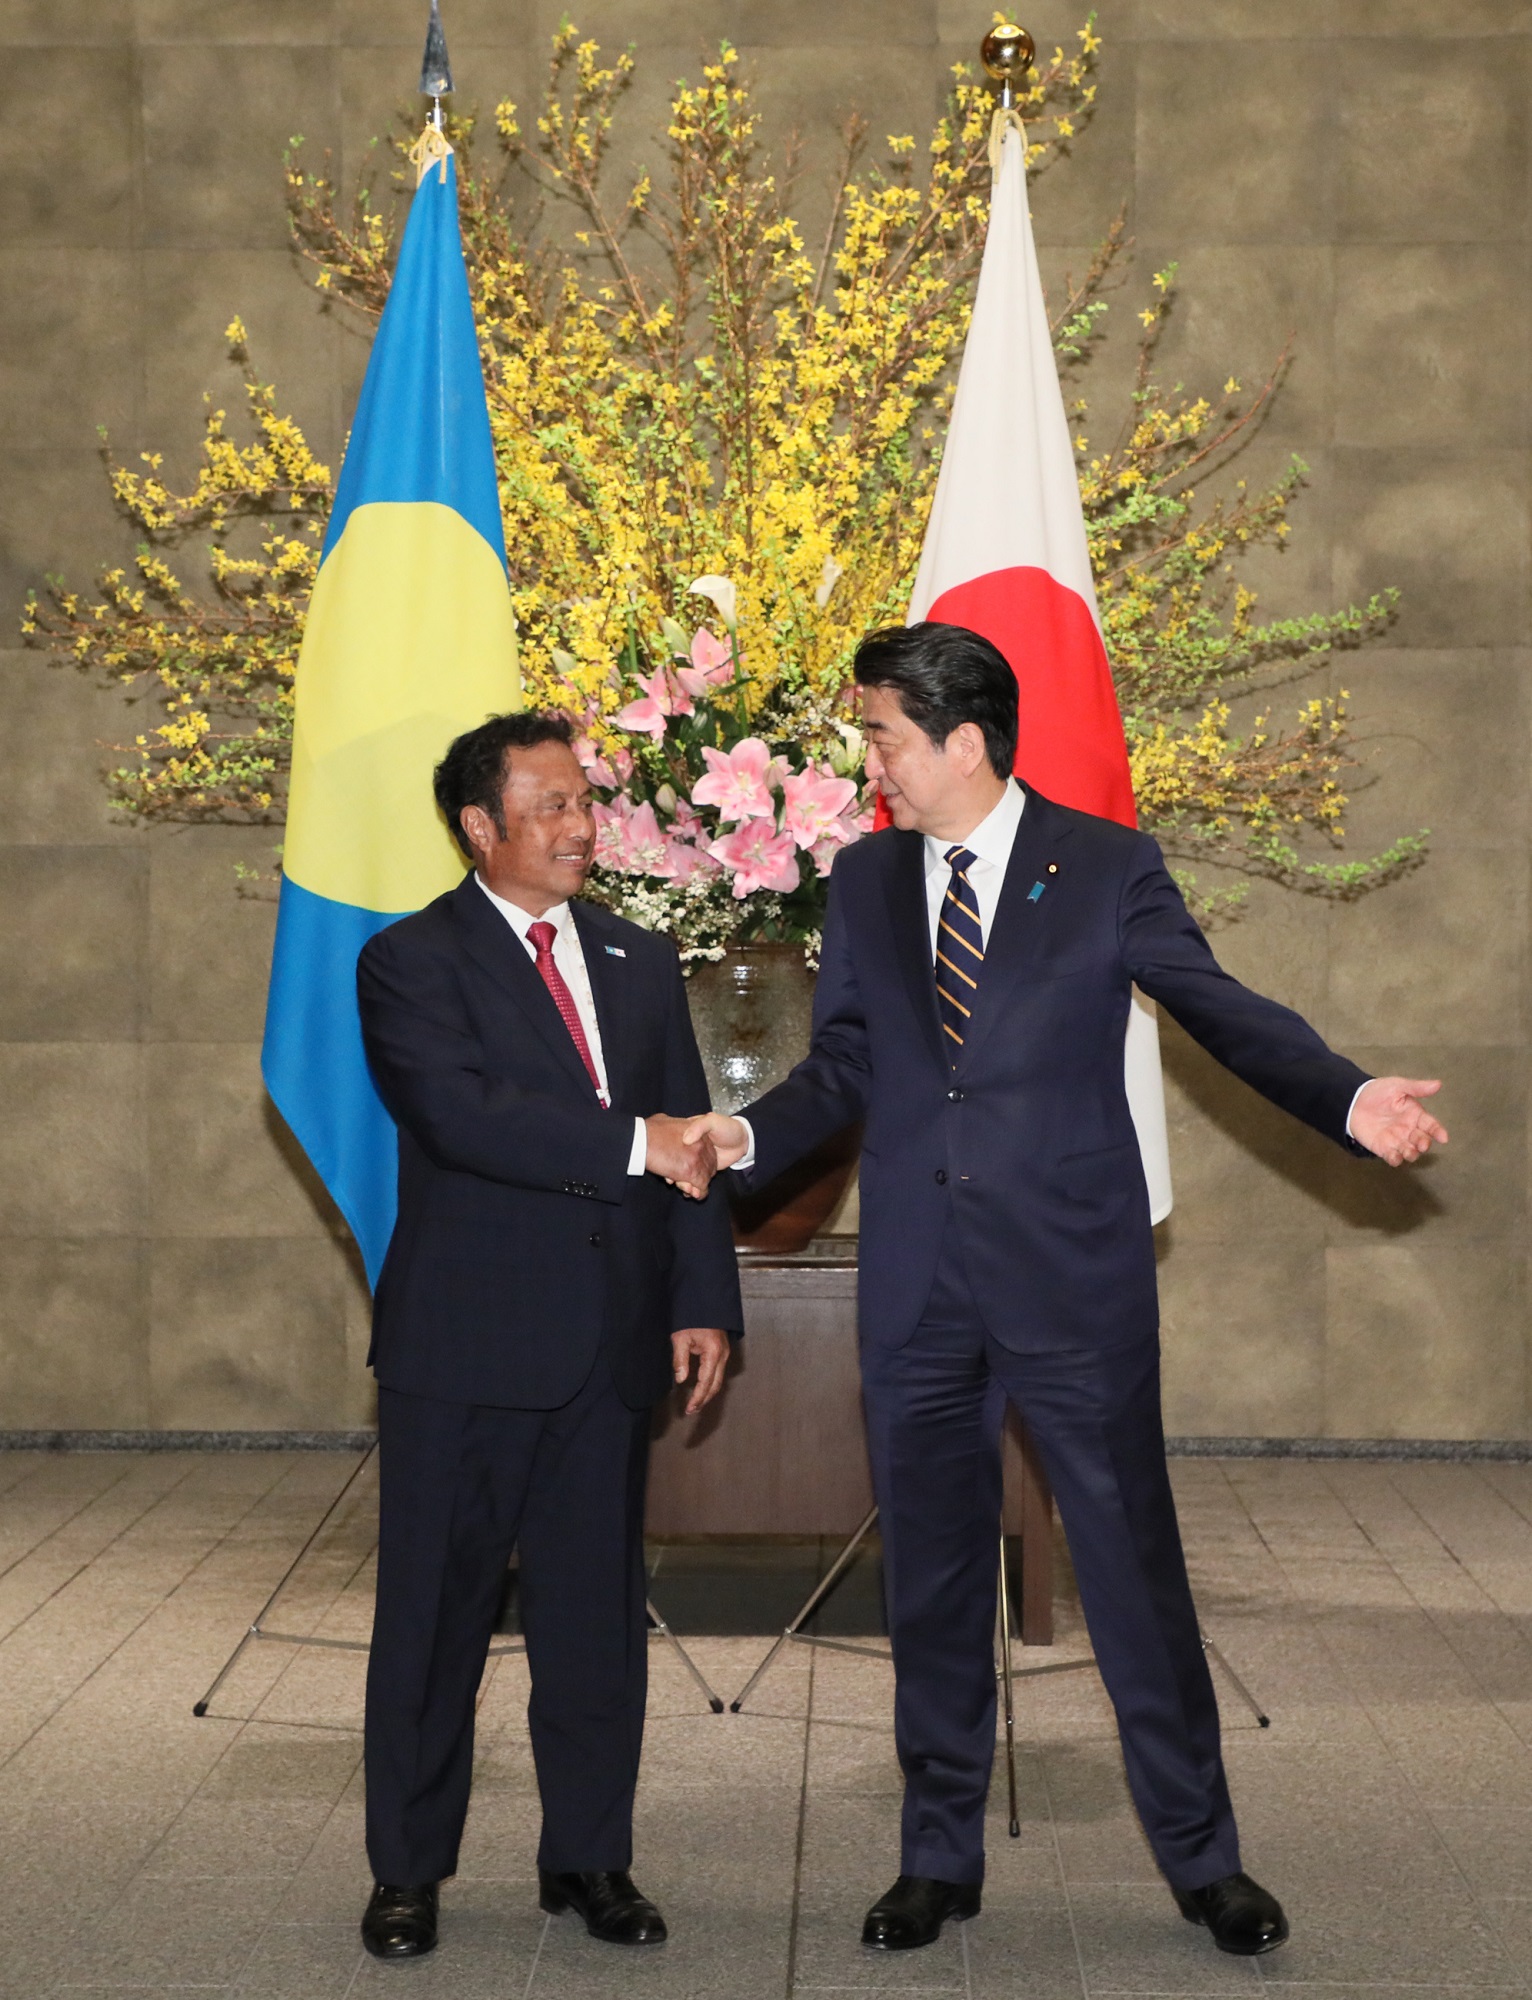 Photograph of the Prime Minister welcoming the President of Palau